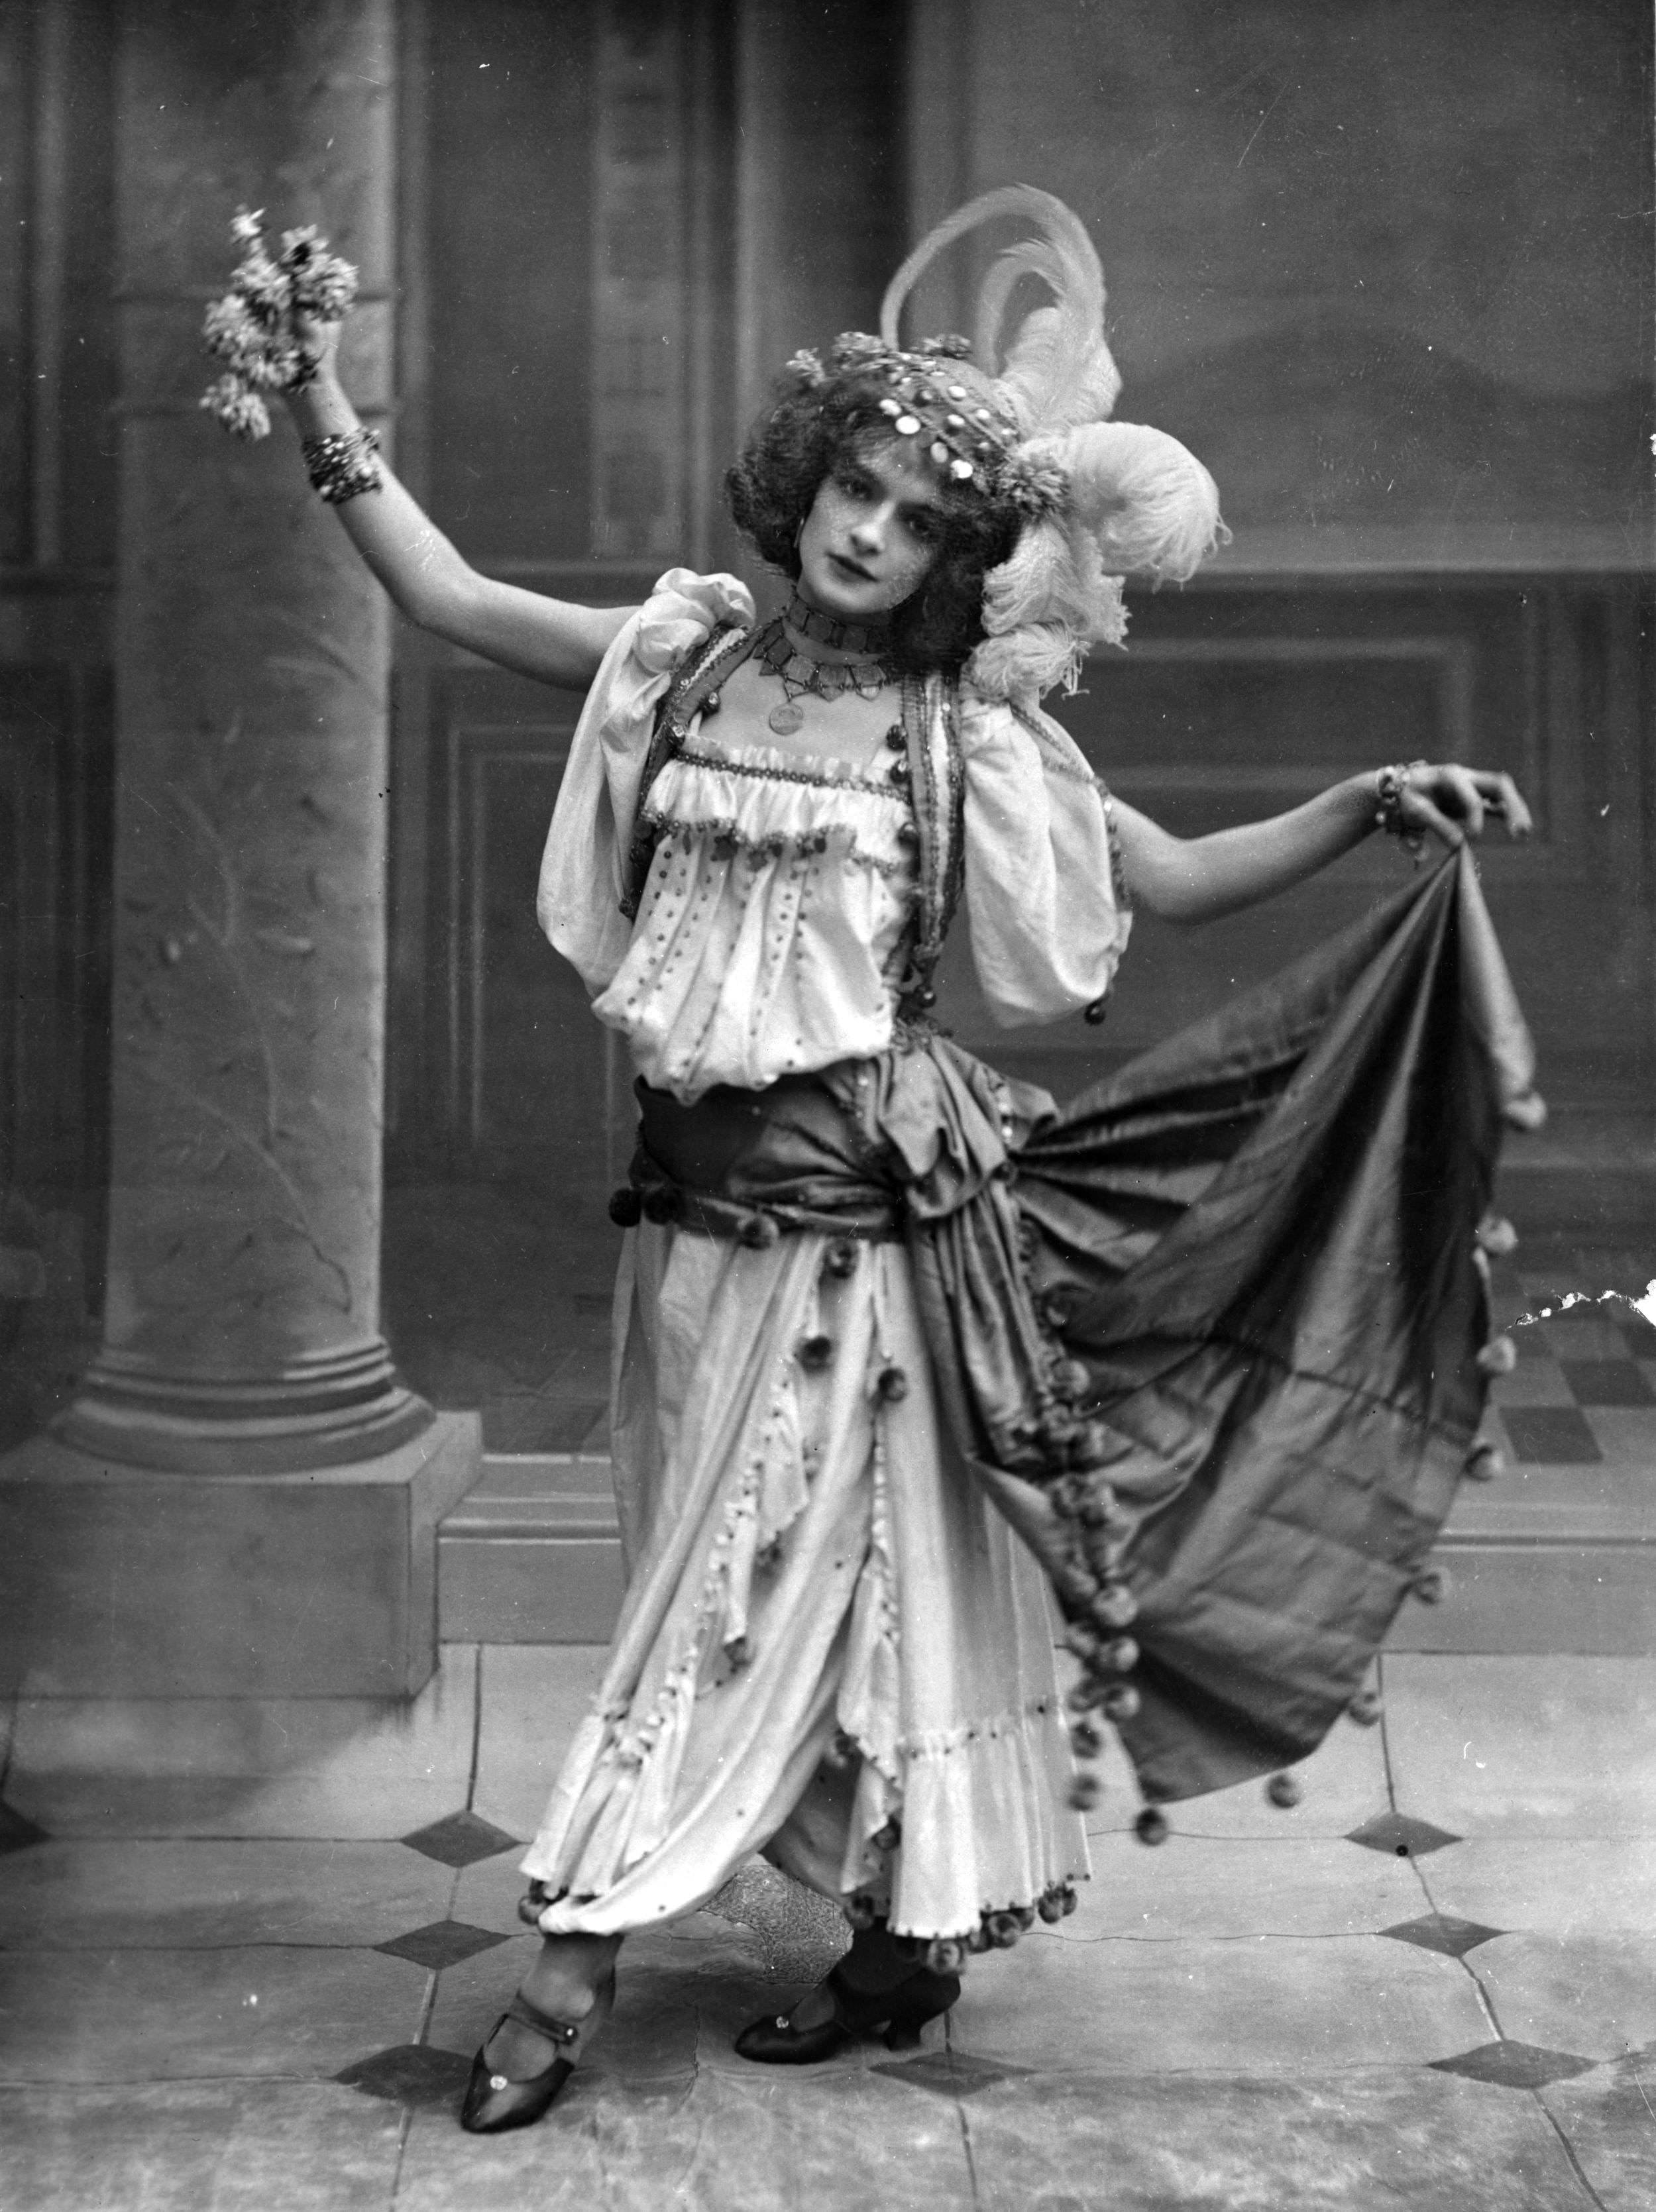 Cabaret artist Blanche Vaudon in costume, France in 1898.